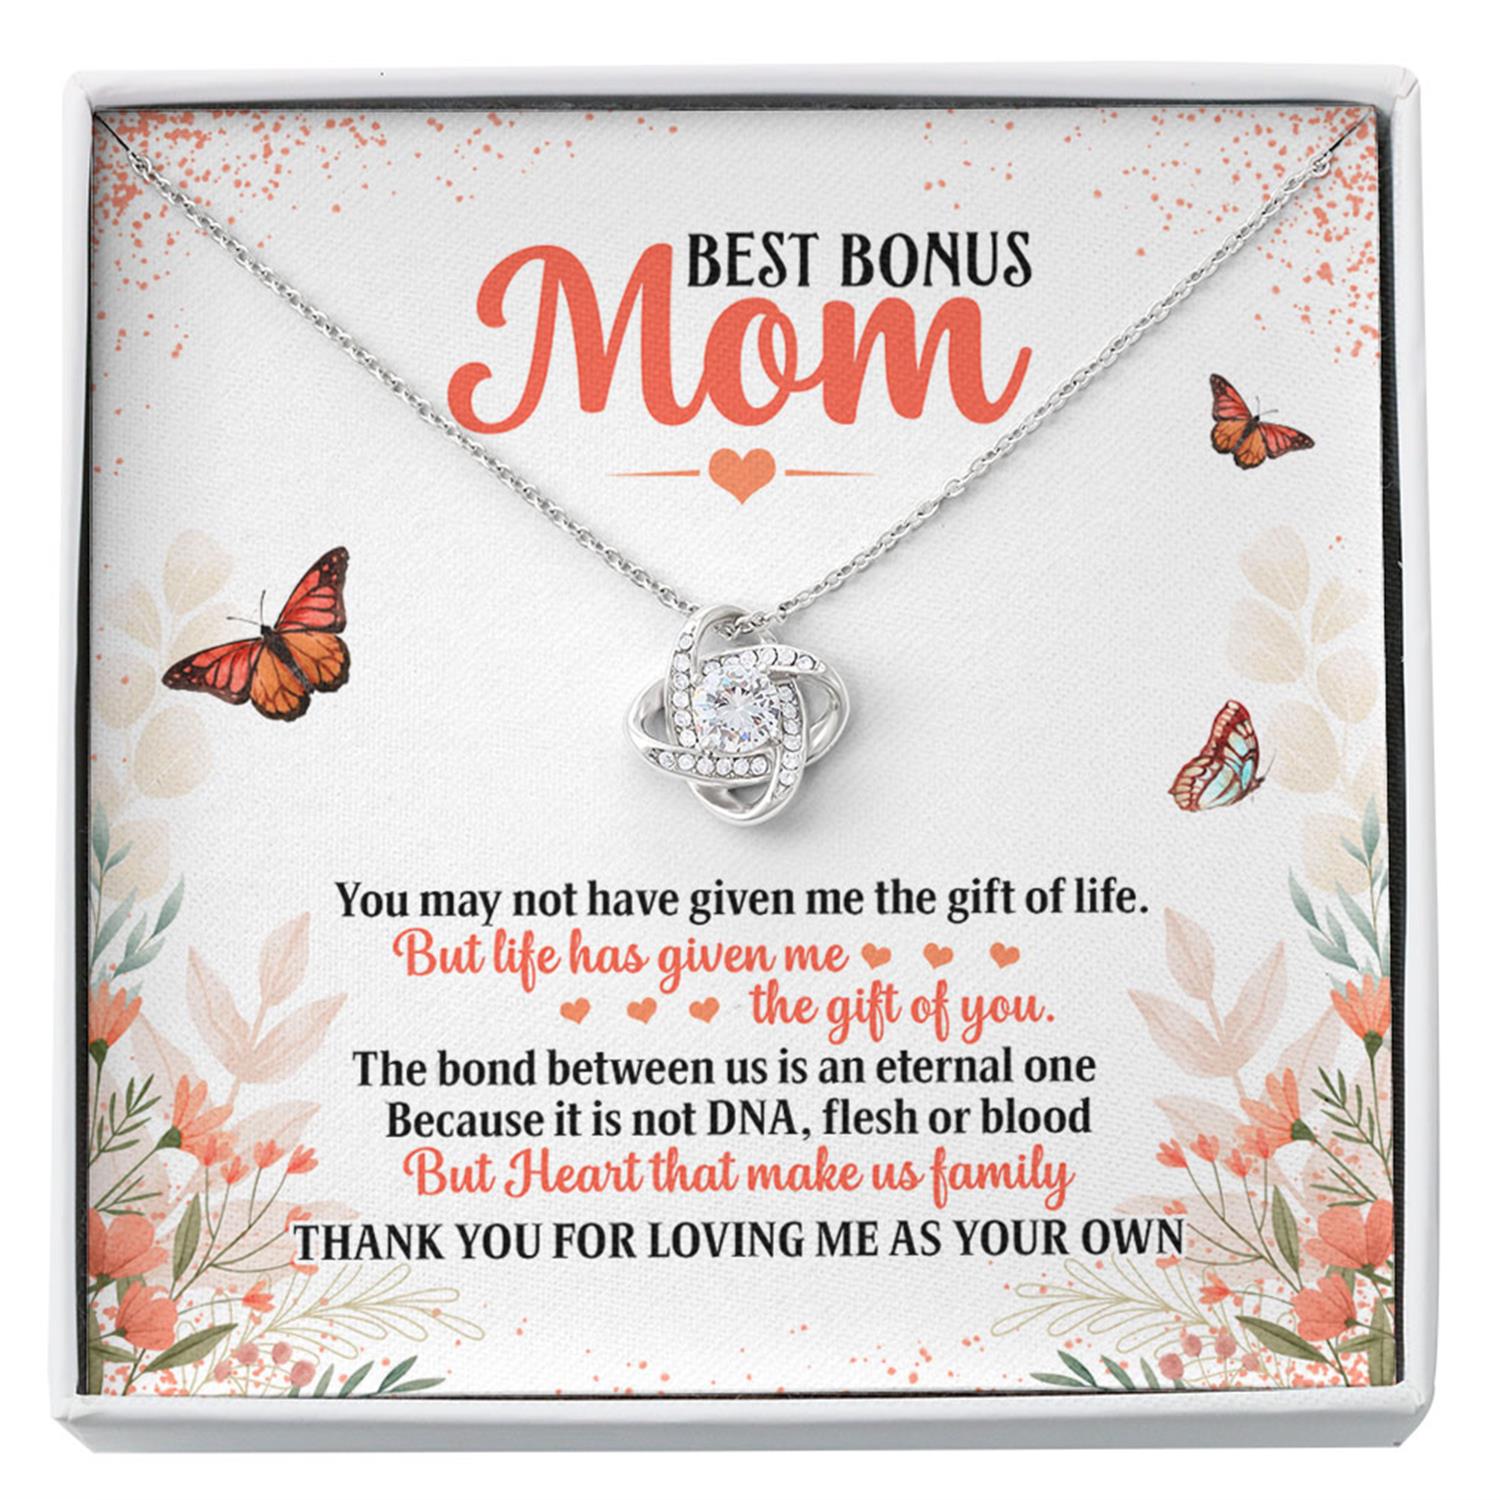 Stepmom Necklace, To My Bonus Mom Necklace - Thank For You Loving Me As Your Own Custom Necklace